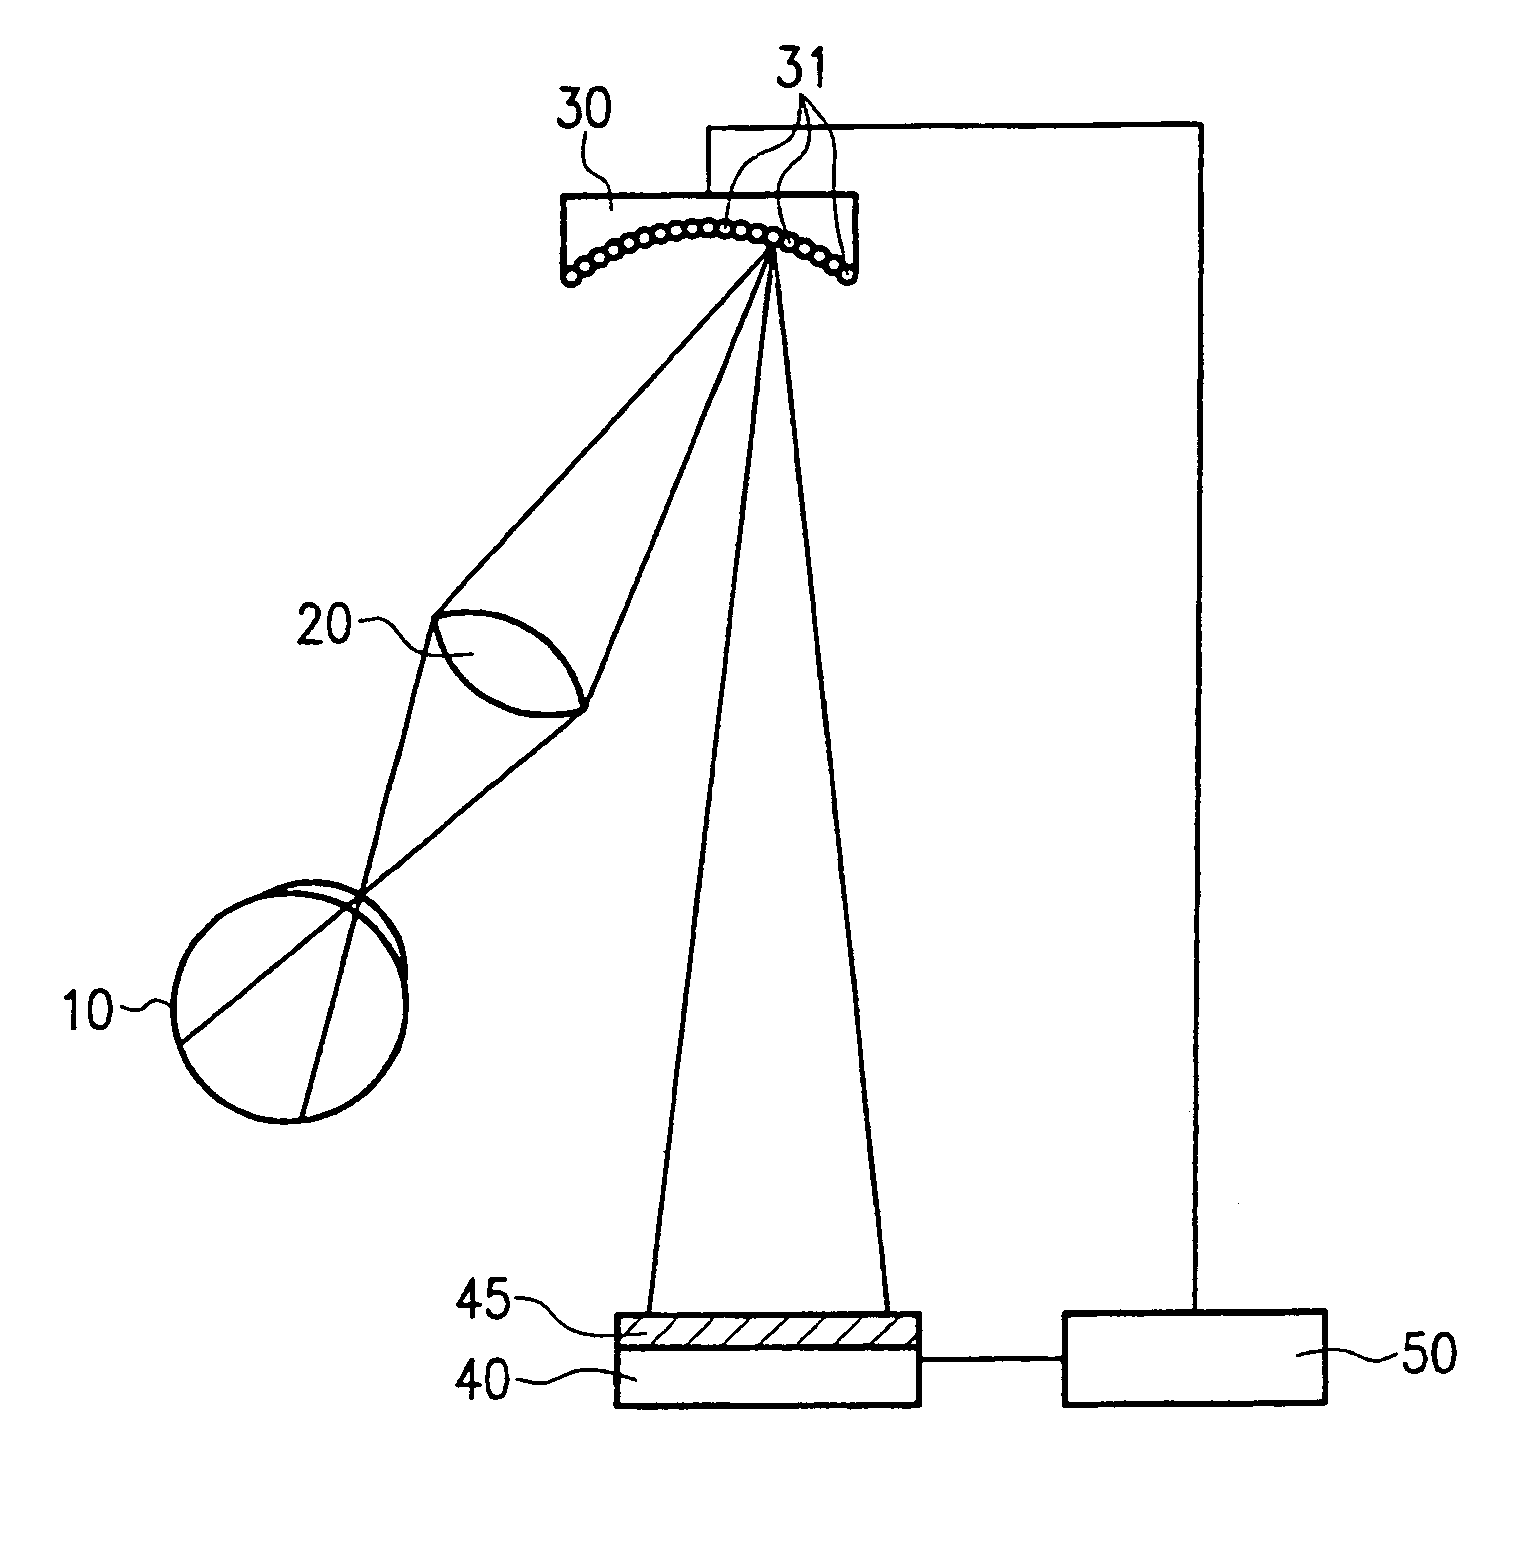 Method for determining vision defects and for collecting data for correcting vision defects of the eye by interaction of a patient with an examiner and apparatus therefor